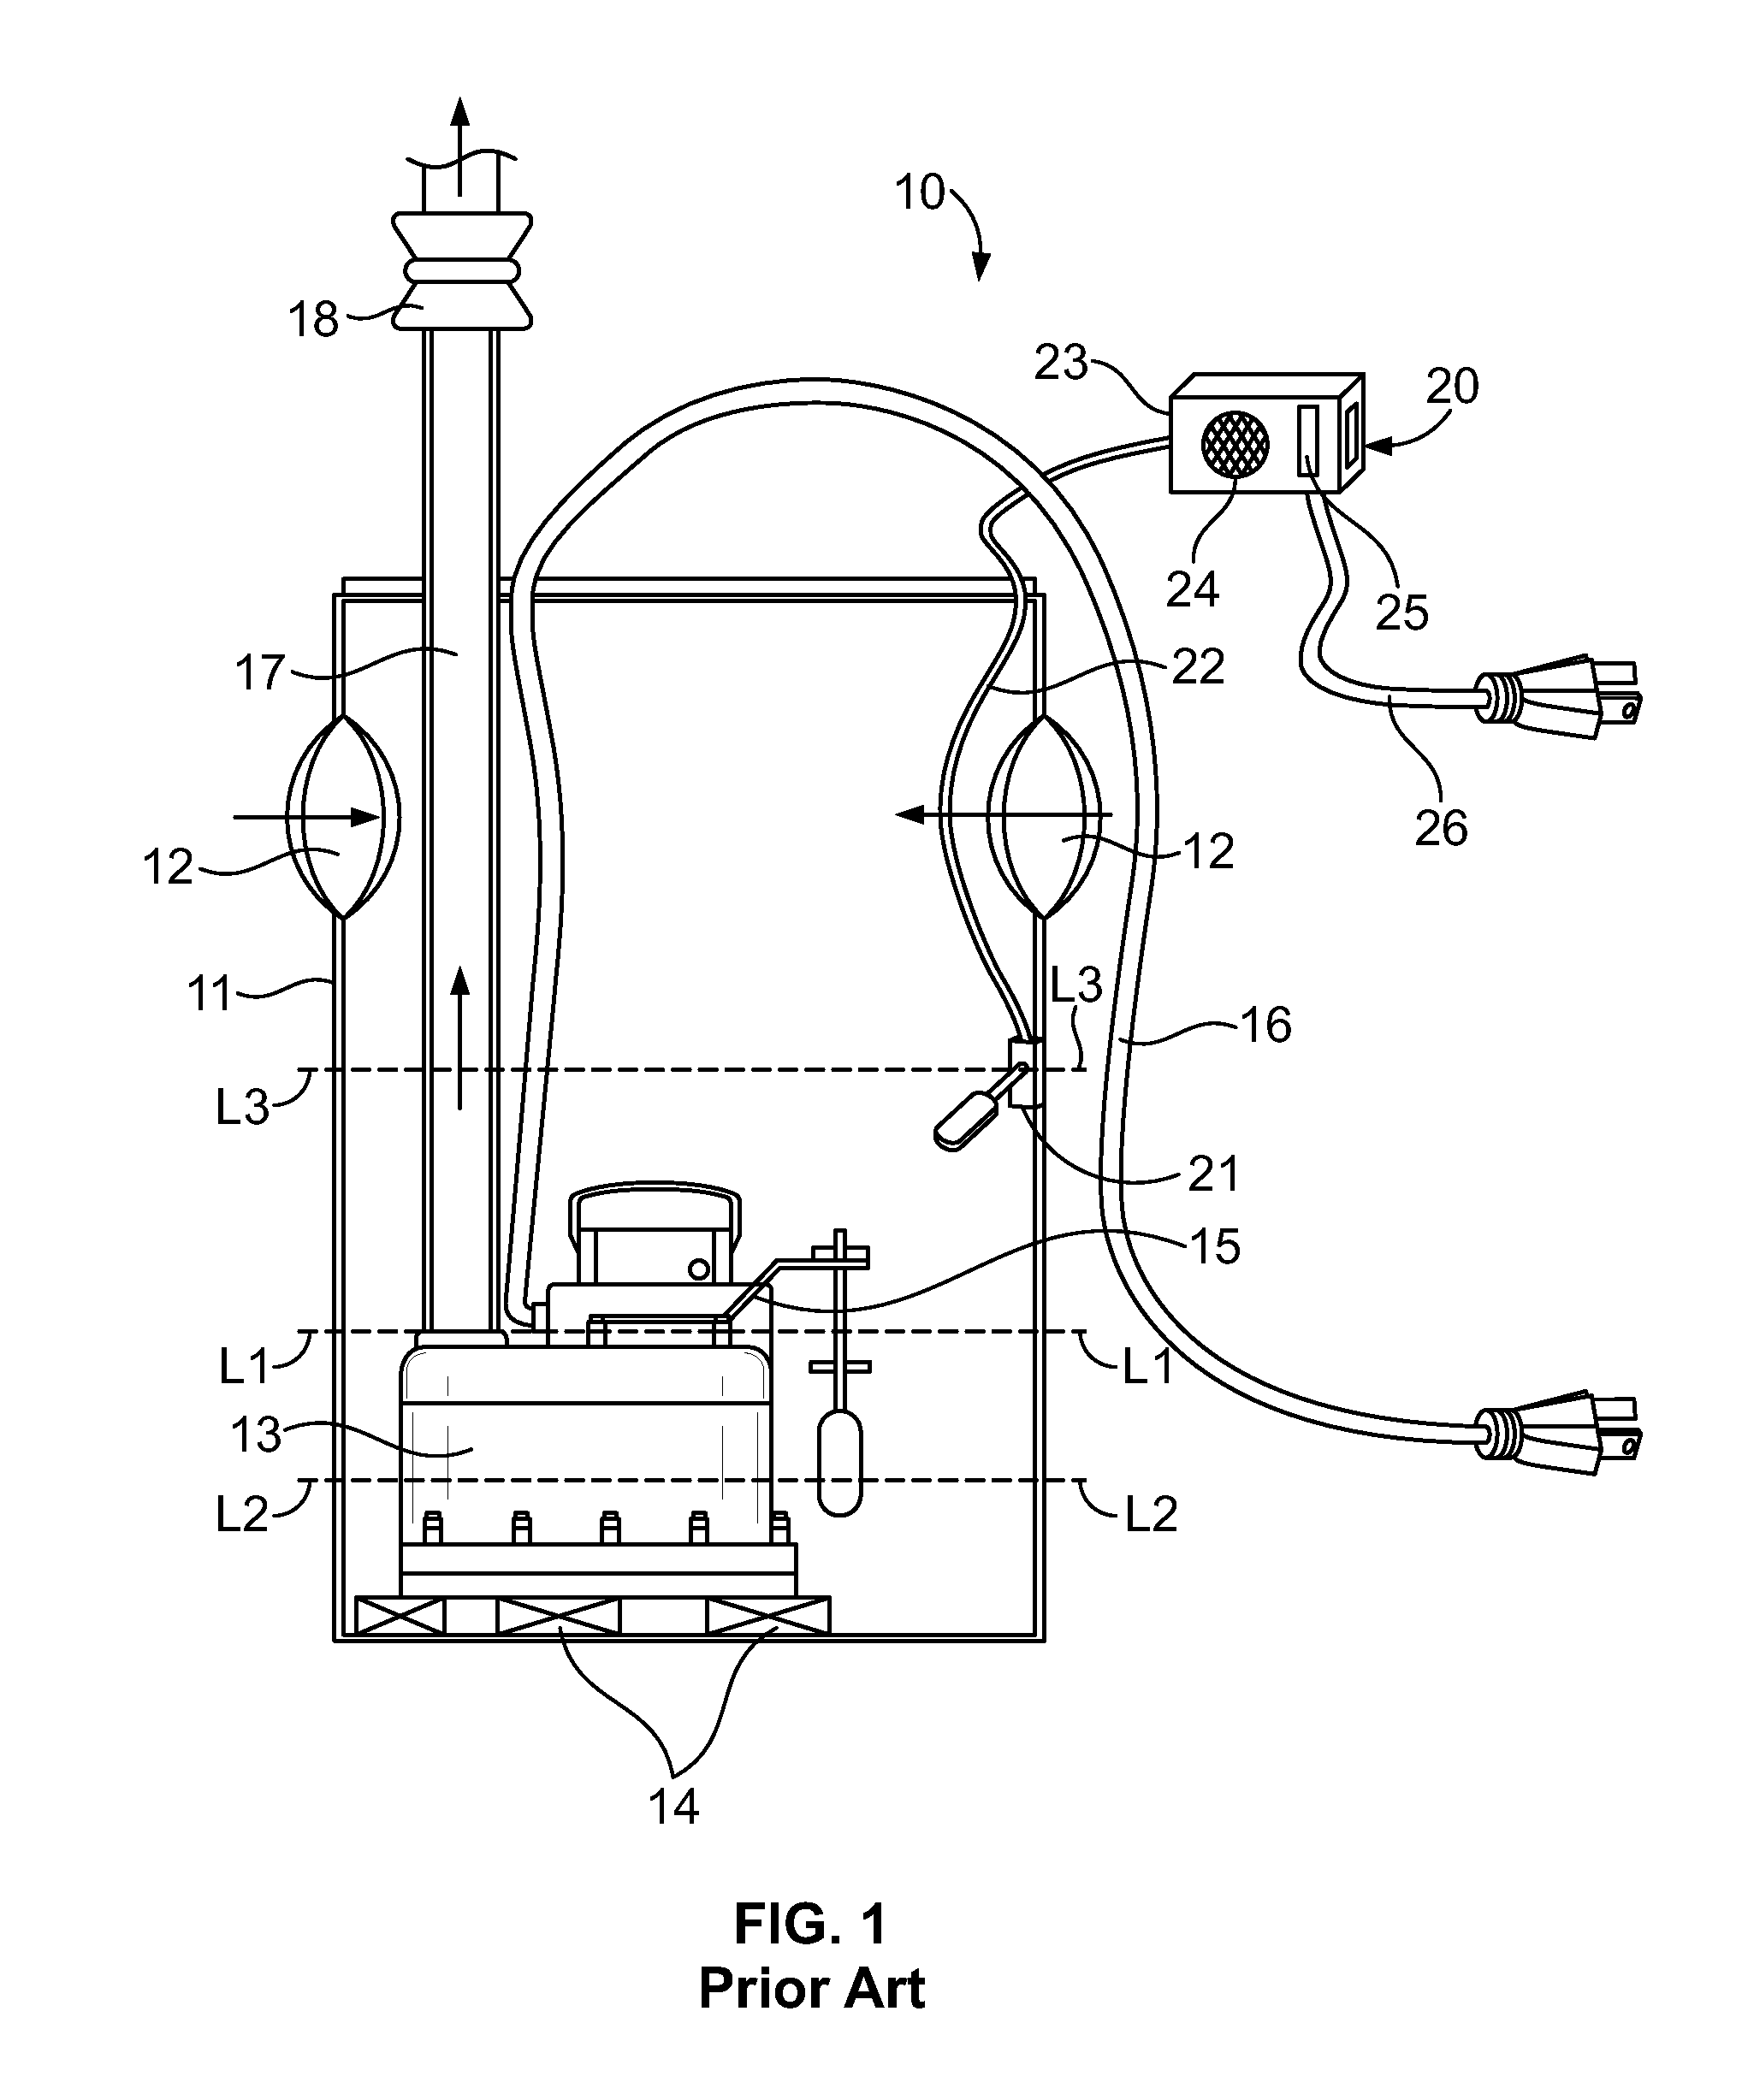 Test and monitoring system for a sump pump installation having a self-monitoring valve module for admitting water to the sump pit